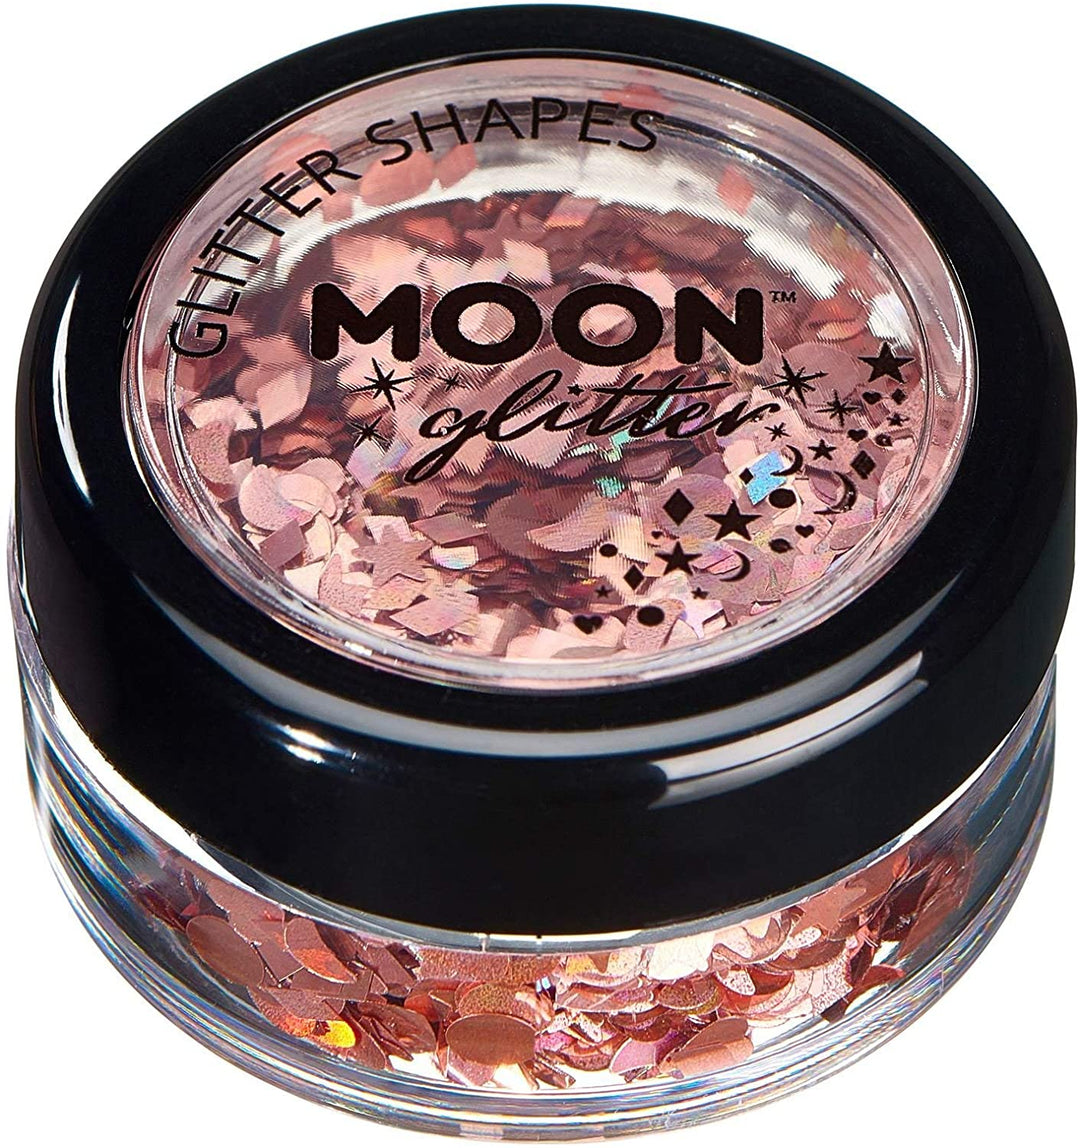 Holographic Glitter Shapes by Moon Glitter - Rose Gold - Cosmetic Festival Makeup Glitter for Face, Body, Nails, Hair, Lips - 3g